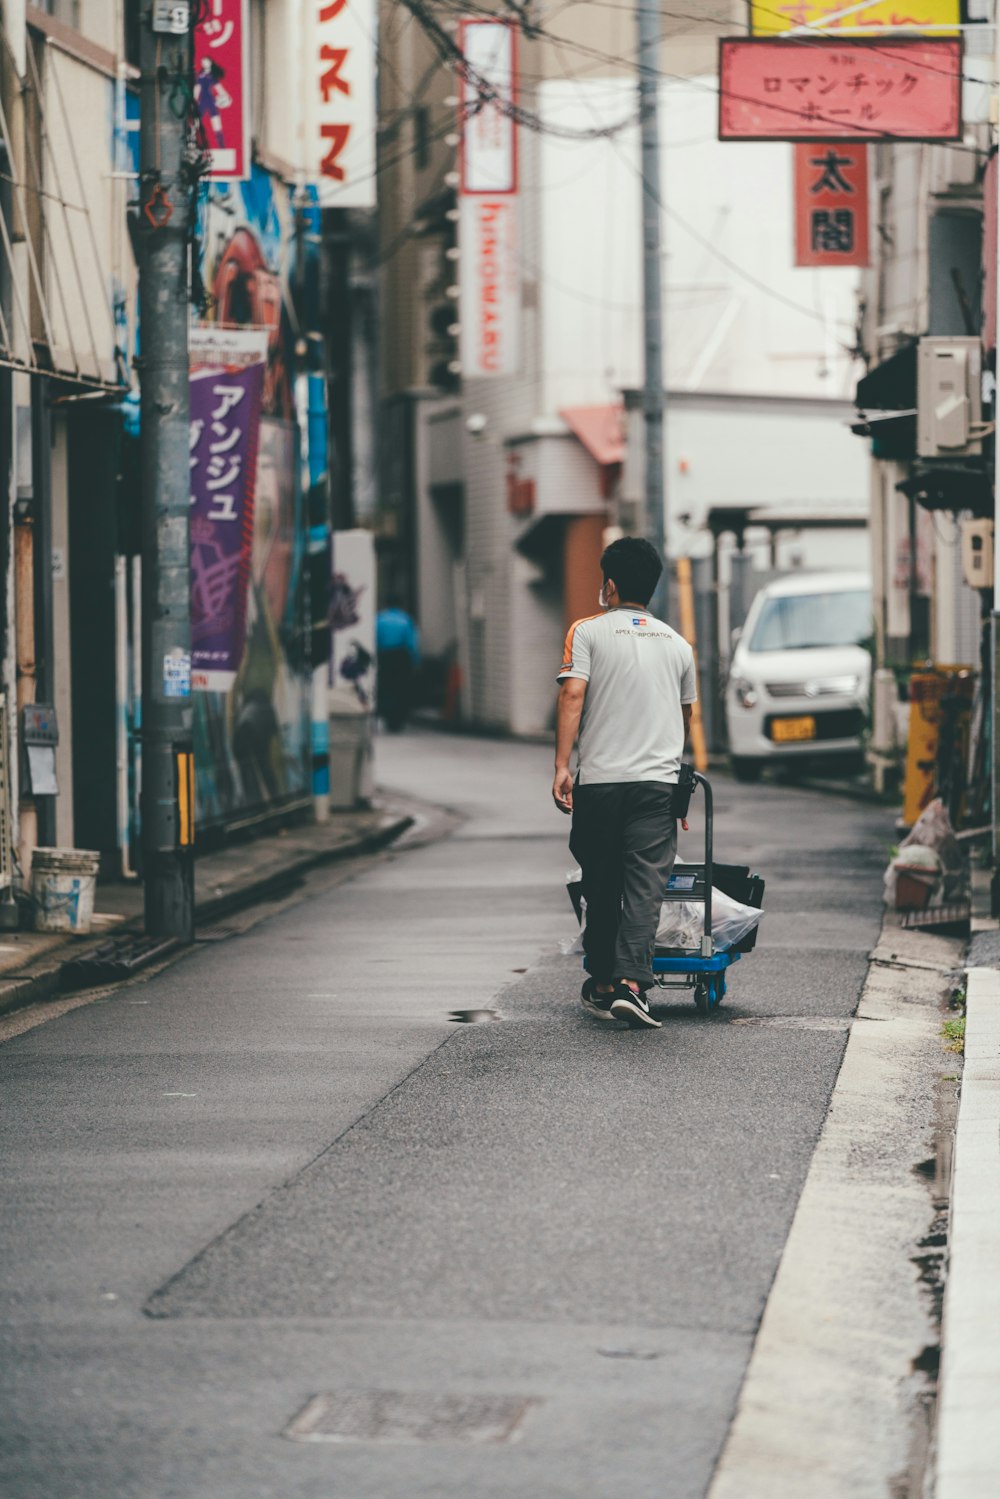 man in white t-shirt and blue denim jeans riding on blue and black kick scooter